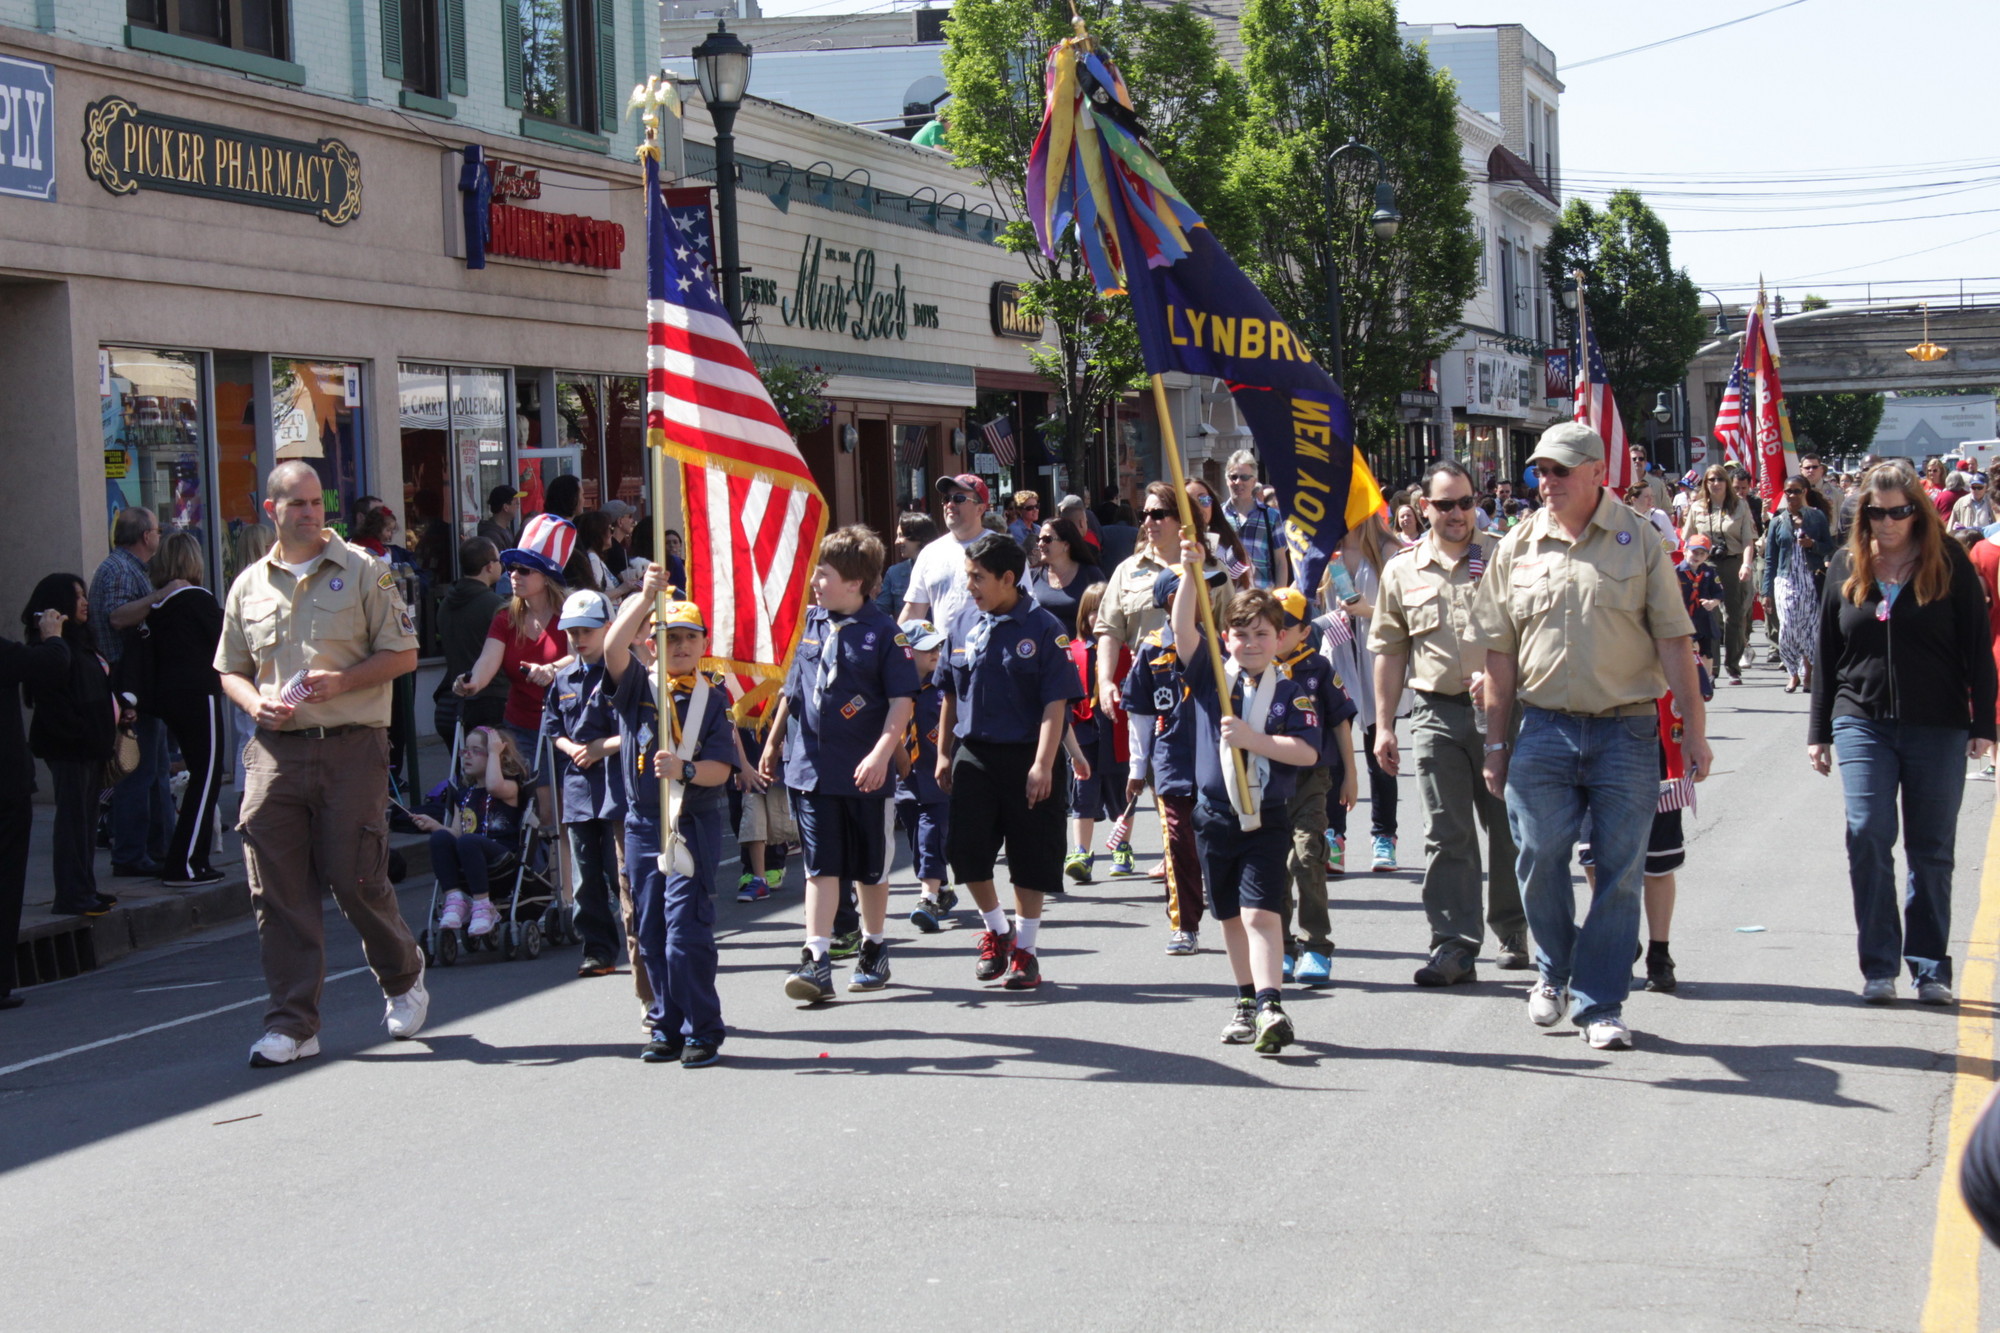 A Boy scout troop proudly displayed their flags in the parade.